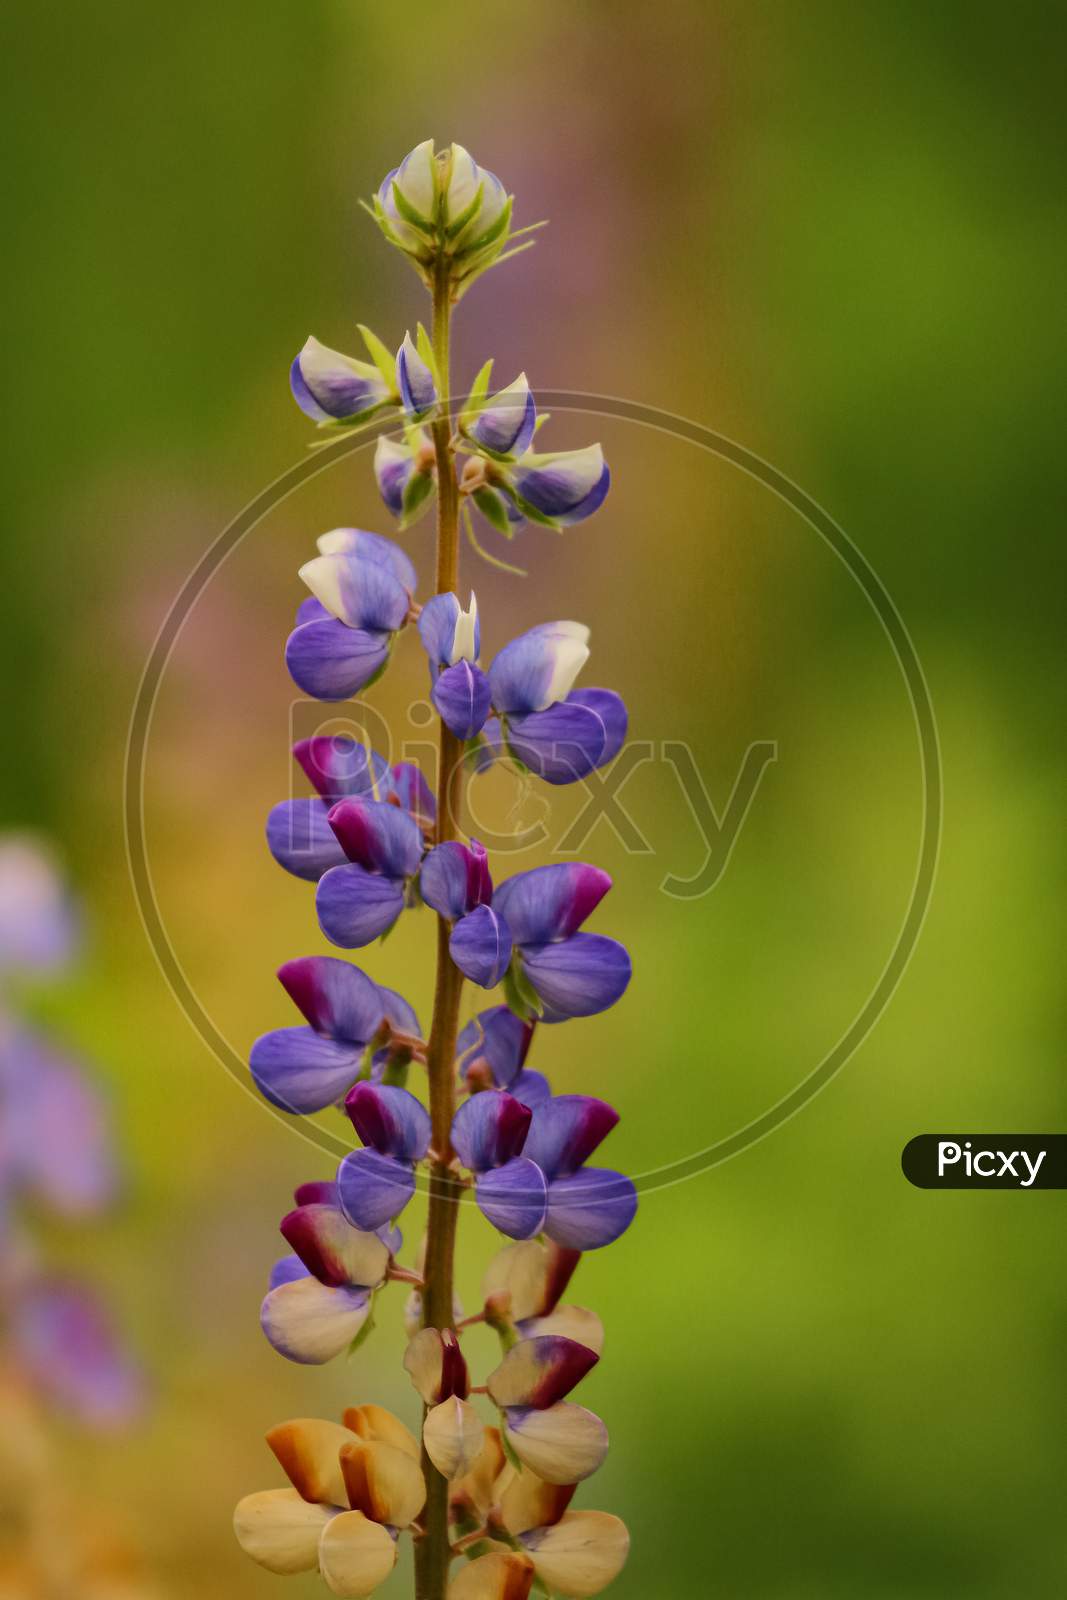 Macro image in very low light of a flower with vibrant colors and blur background